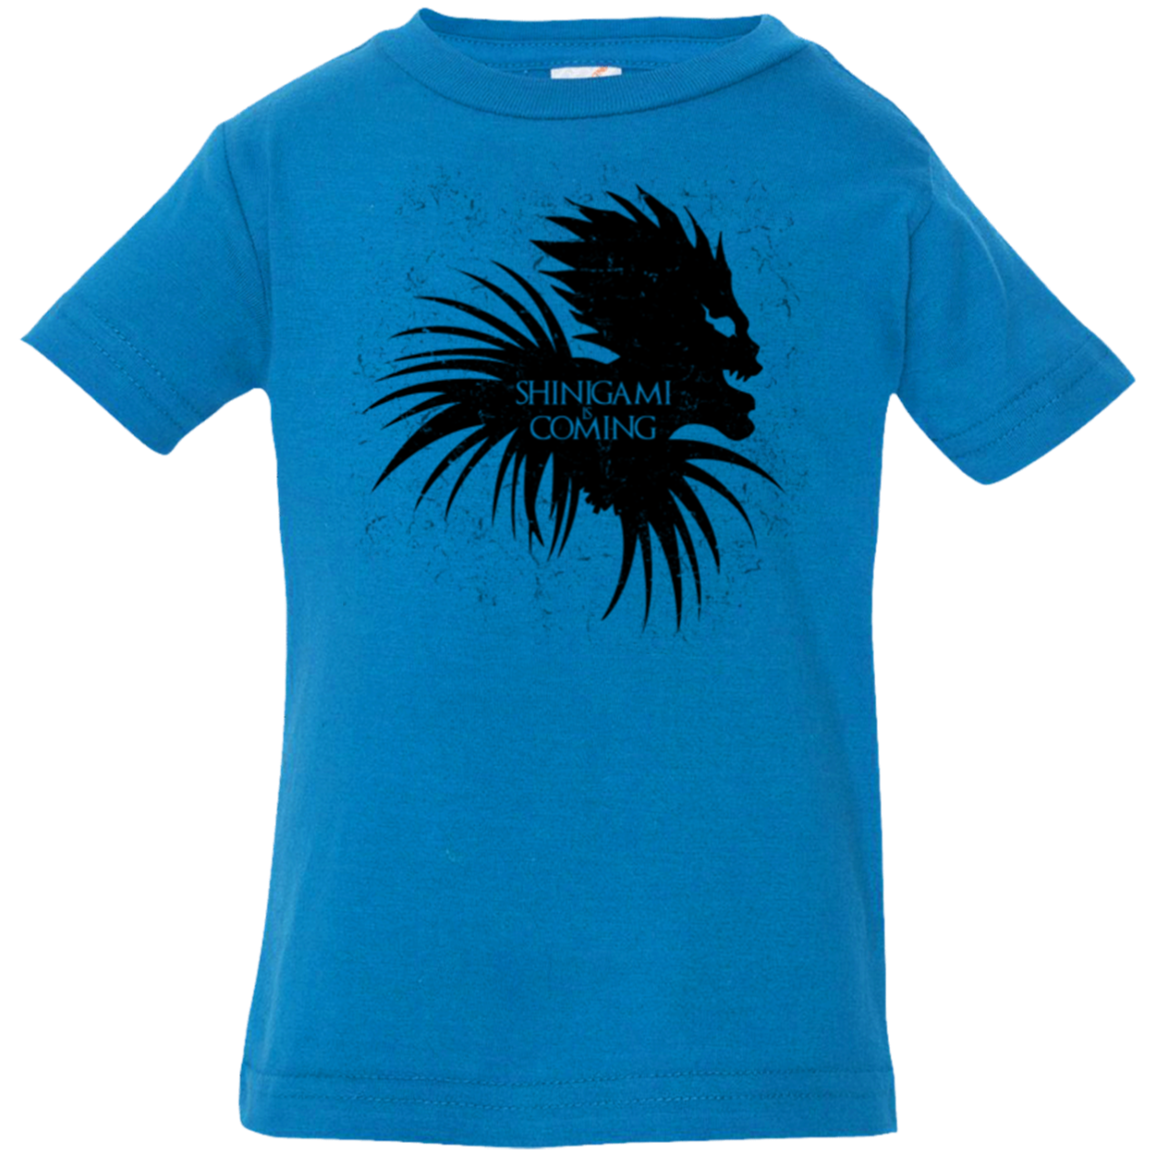 Shinigami Is Coming Infant Premium T-Shirt